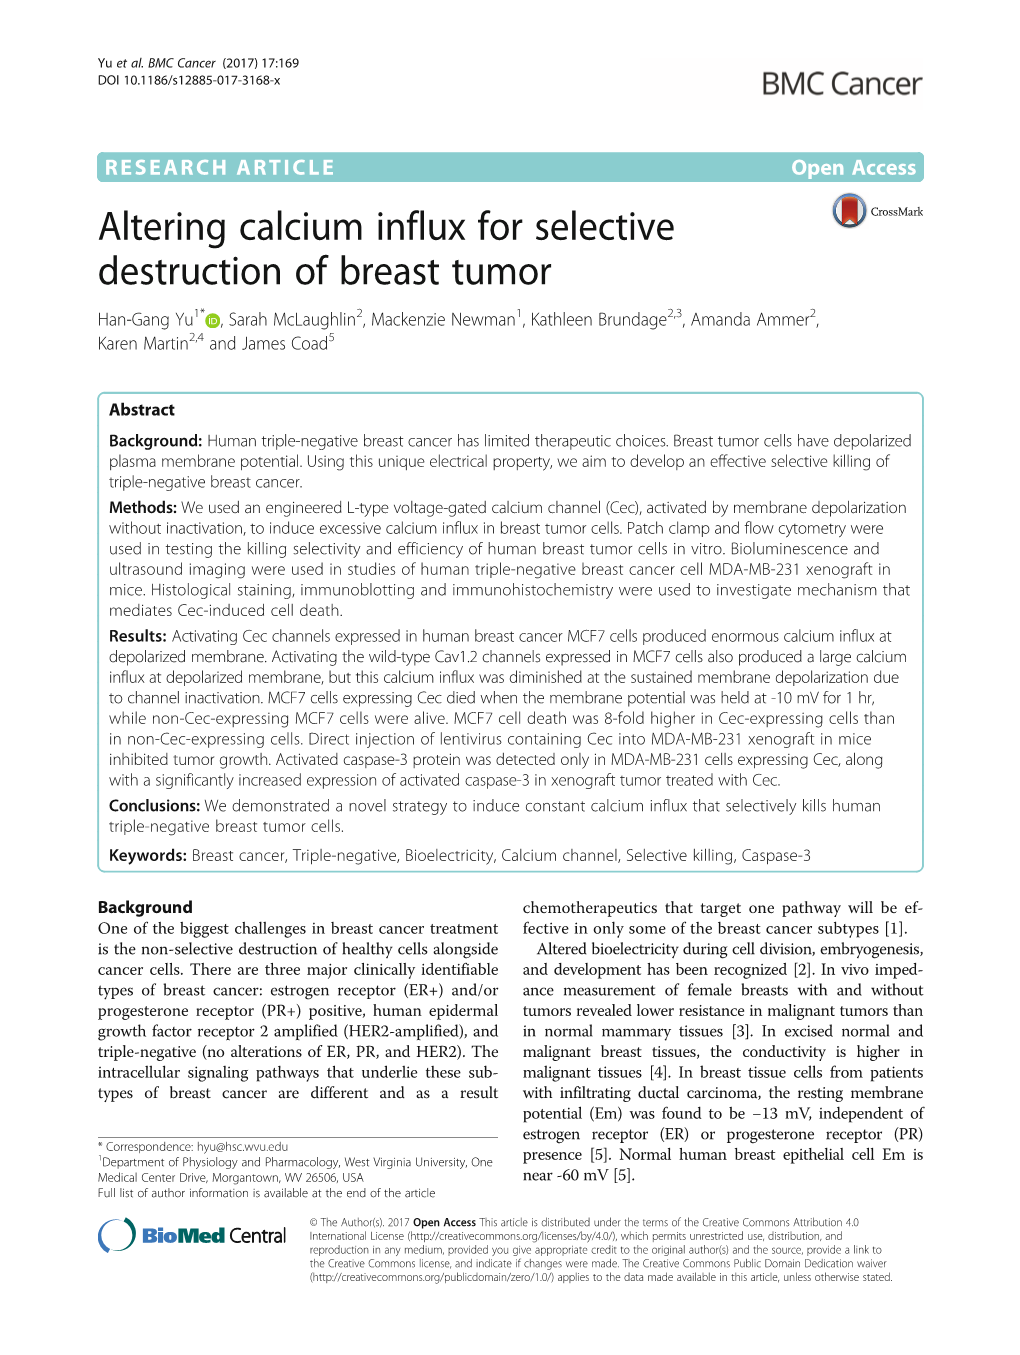 Altering Calcium Influx for Selective Destruction of Breast Tumor